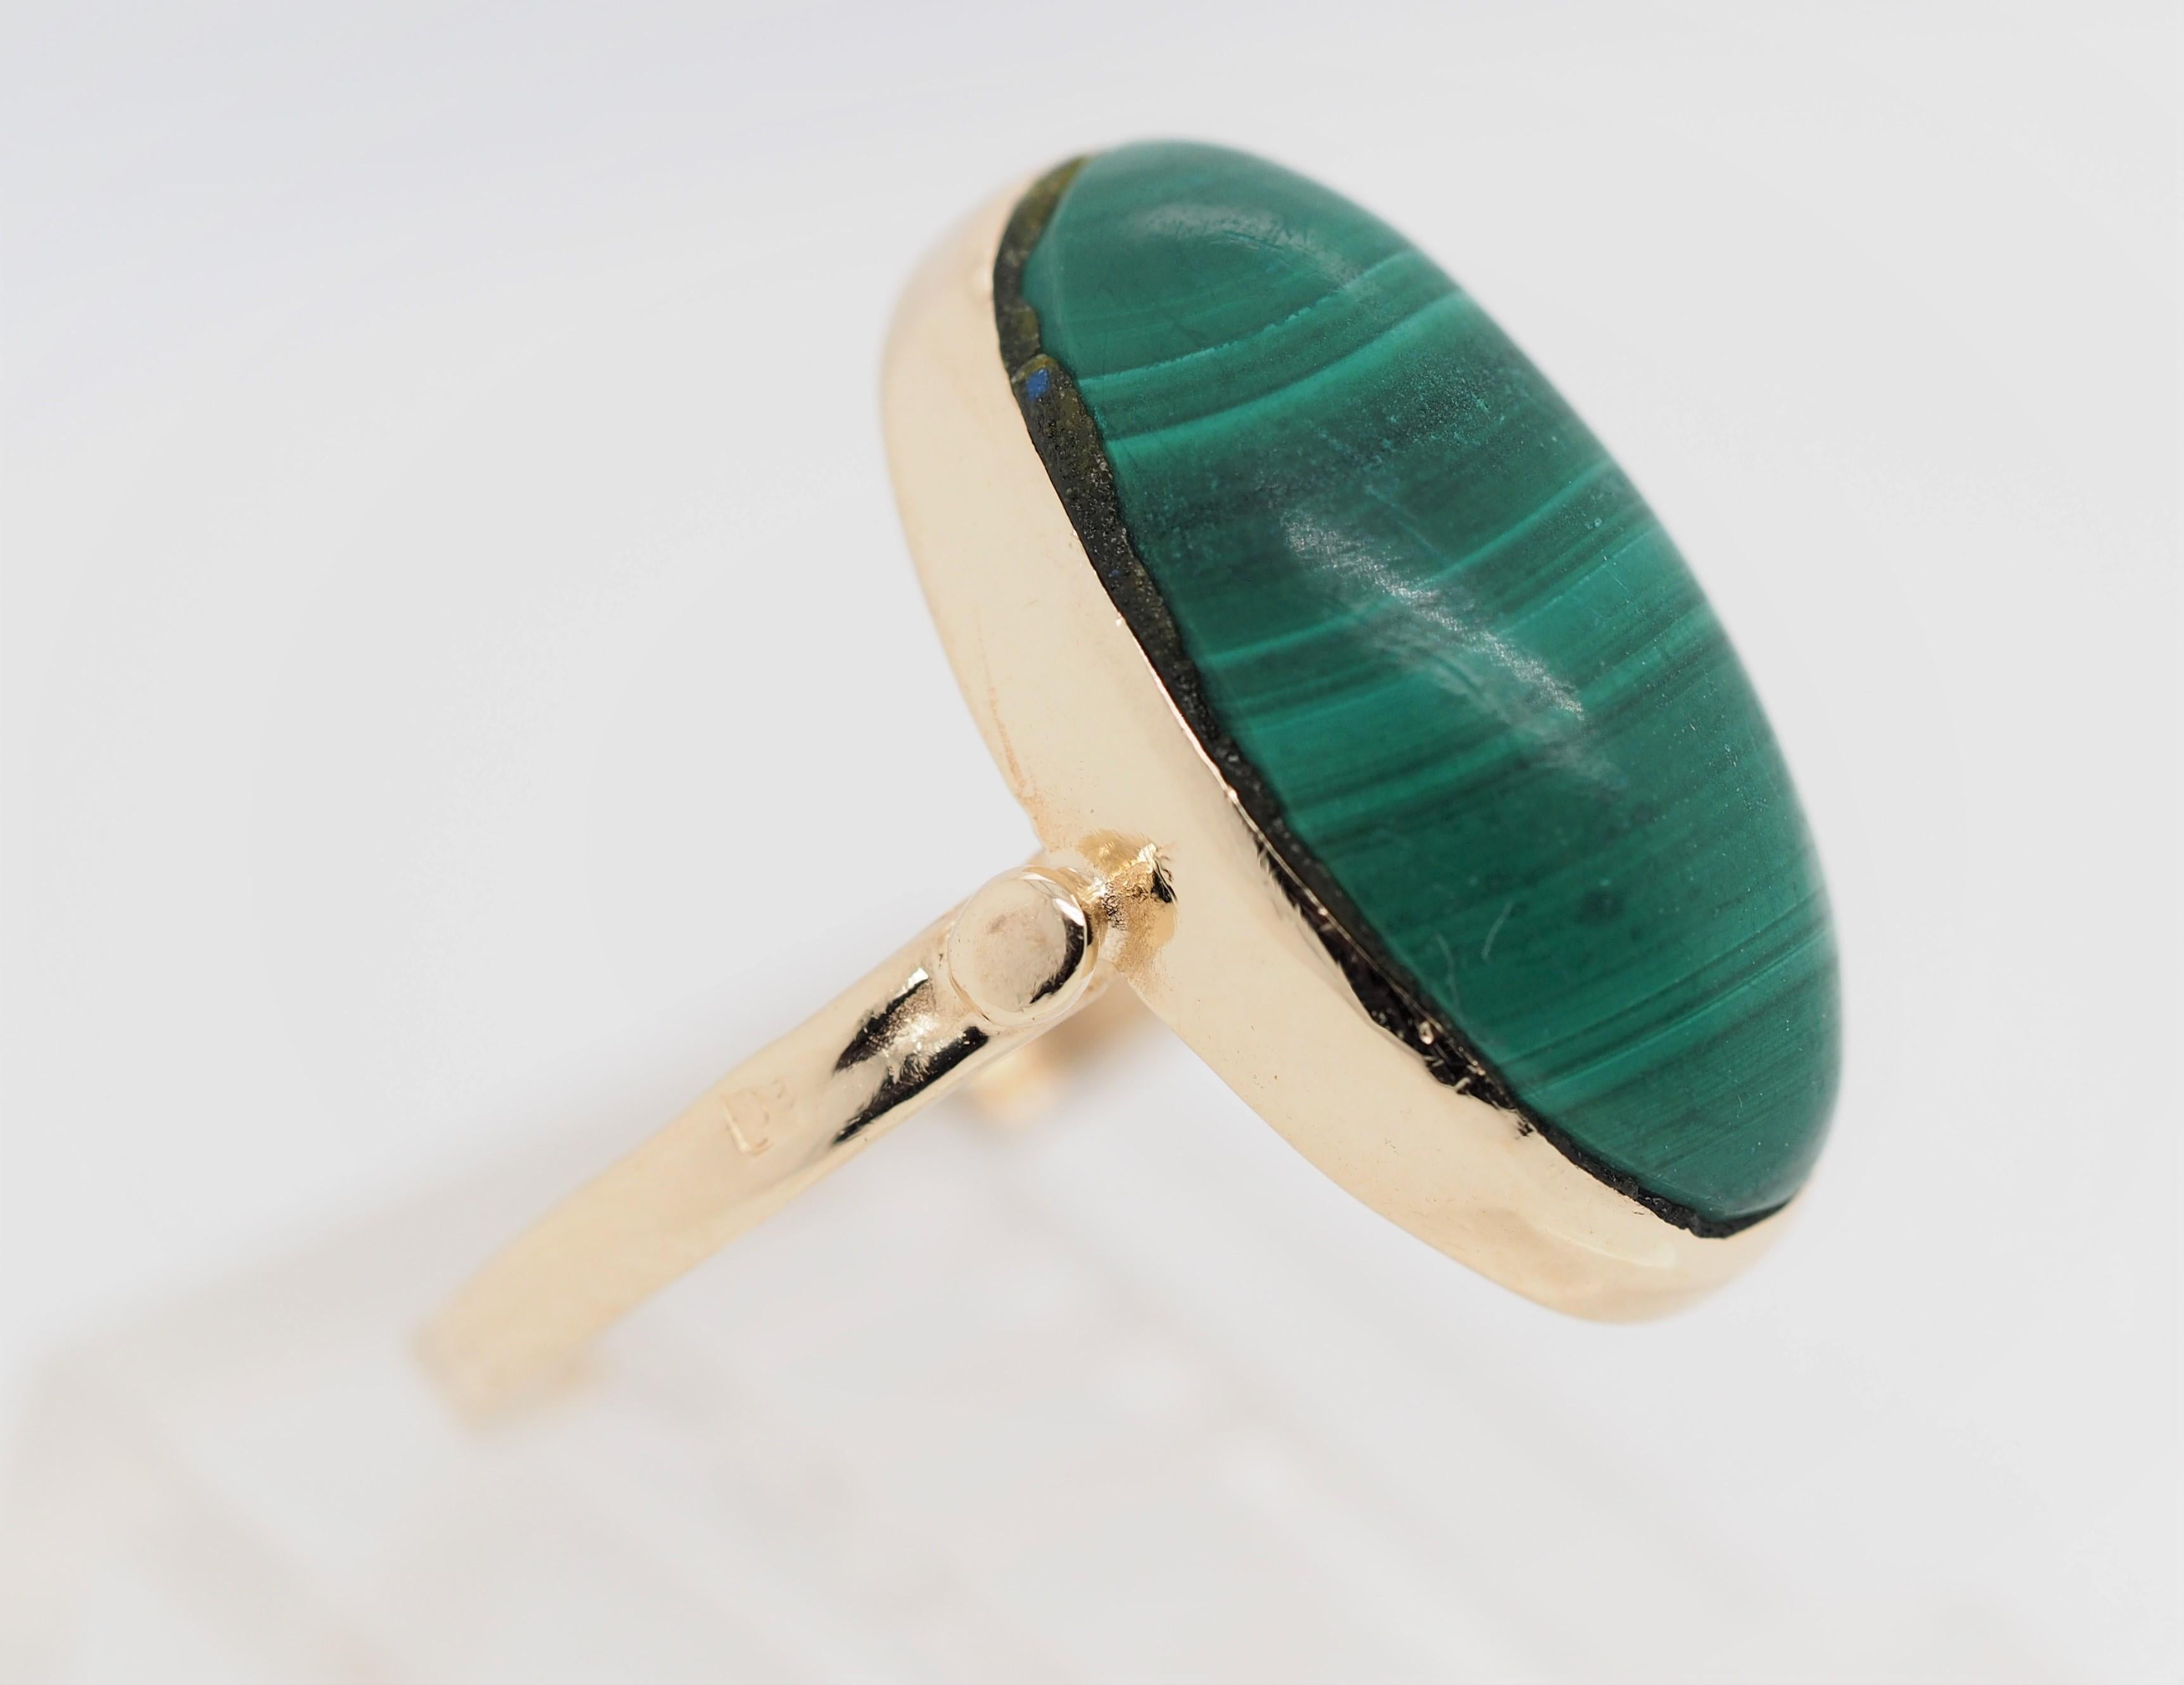 This Vintage beauty is a perfect example of the 1960's style rings. The Marquise Cut Malachite is an eye catcher. 

Item Details: 
Ring Size: 3.25
Metal Type: 14K Yellow Gold 
Weight: 2.6 grams
Hallmark: None
Engraving: None
Width: 15.7  mm at head